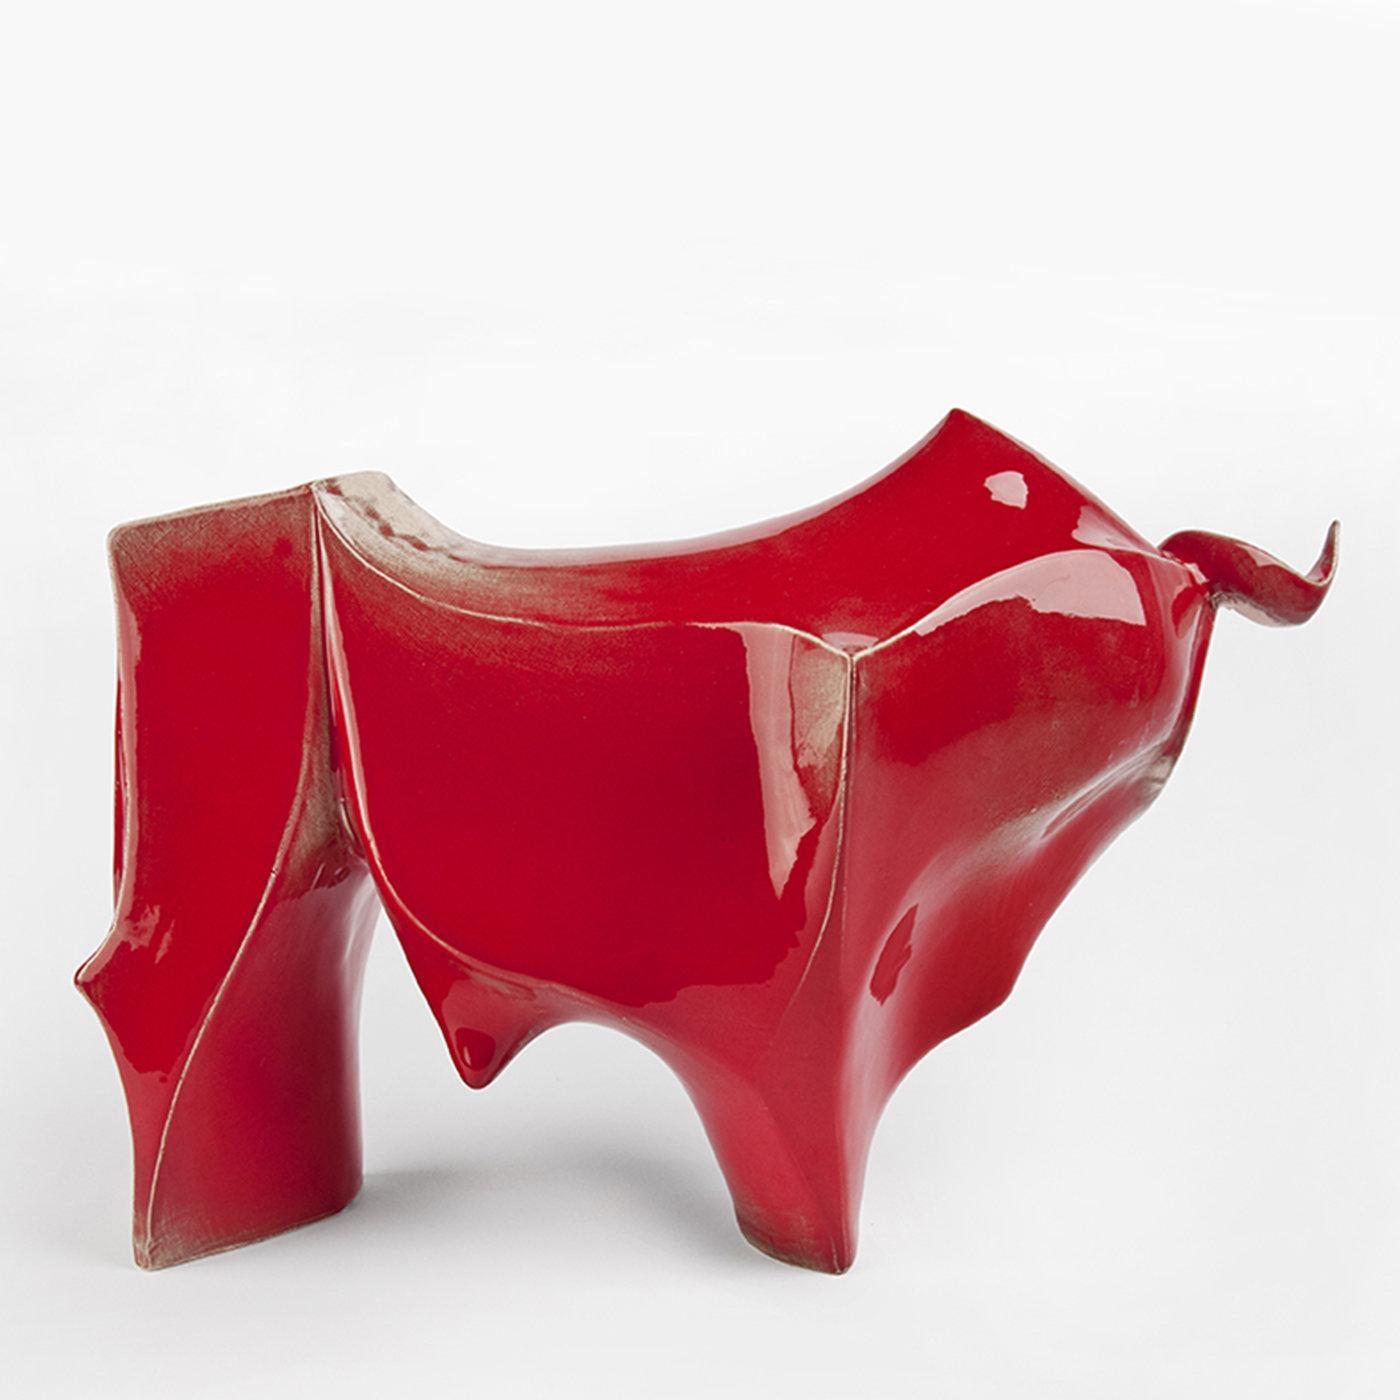 Inspired by Van Gogh's unique painting style and Picasso's renowned bulls, this sculpture boasts a contemporary aesthetic of refined architectural value. Masterfully handcrafted of ceramic and painted in a polished red lacquer, the bull boasts a